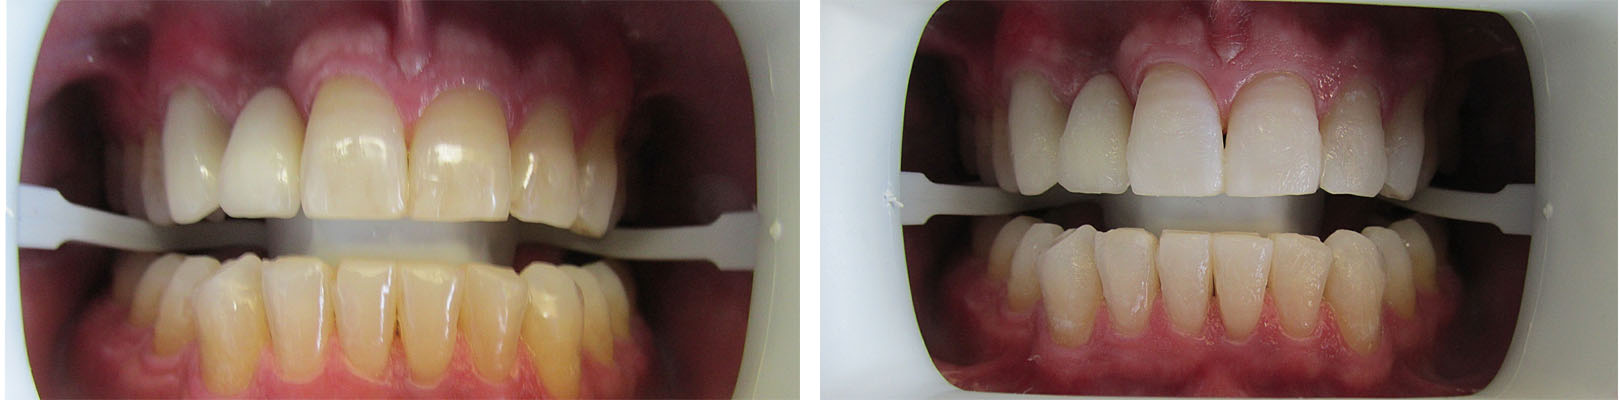 Before and After Dental Bleaching Photo